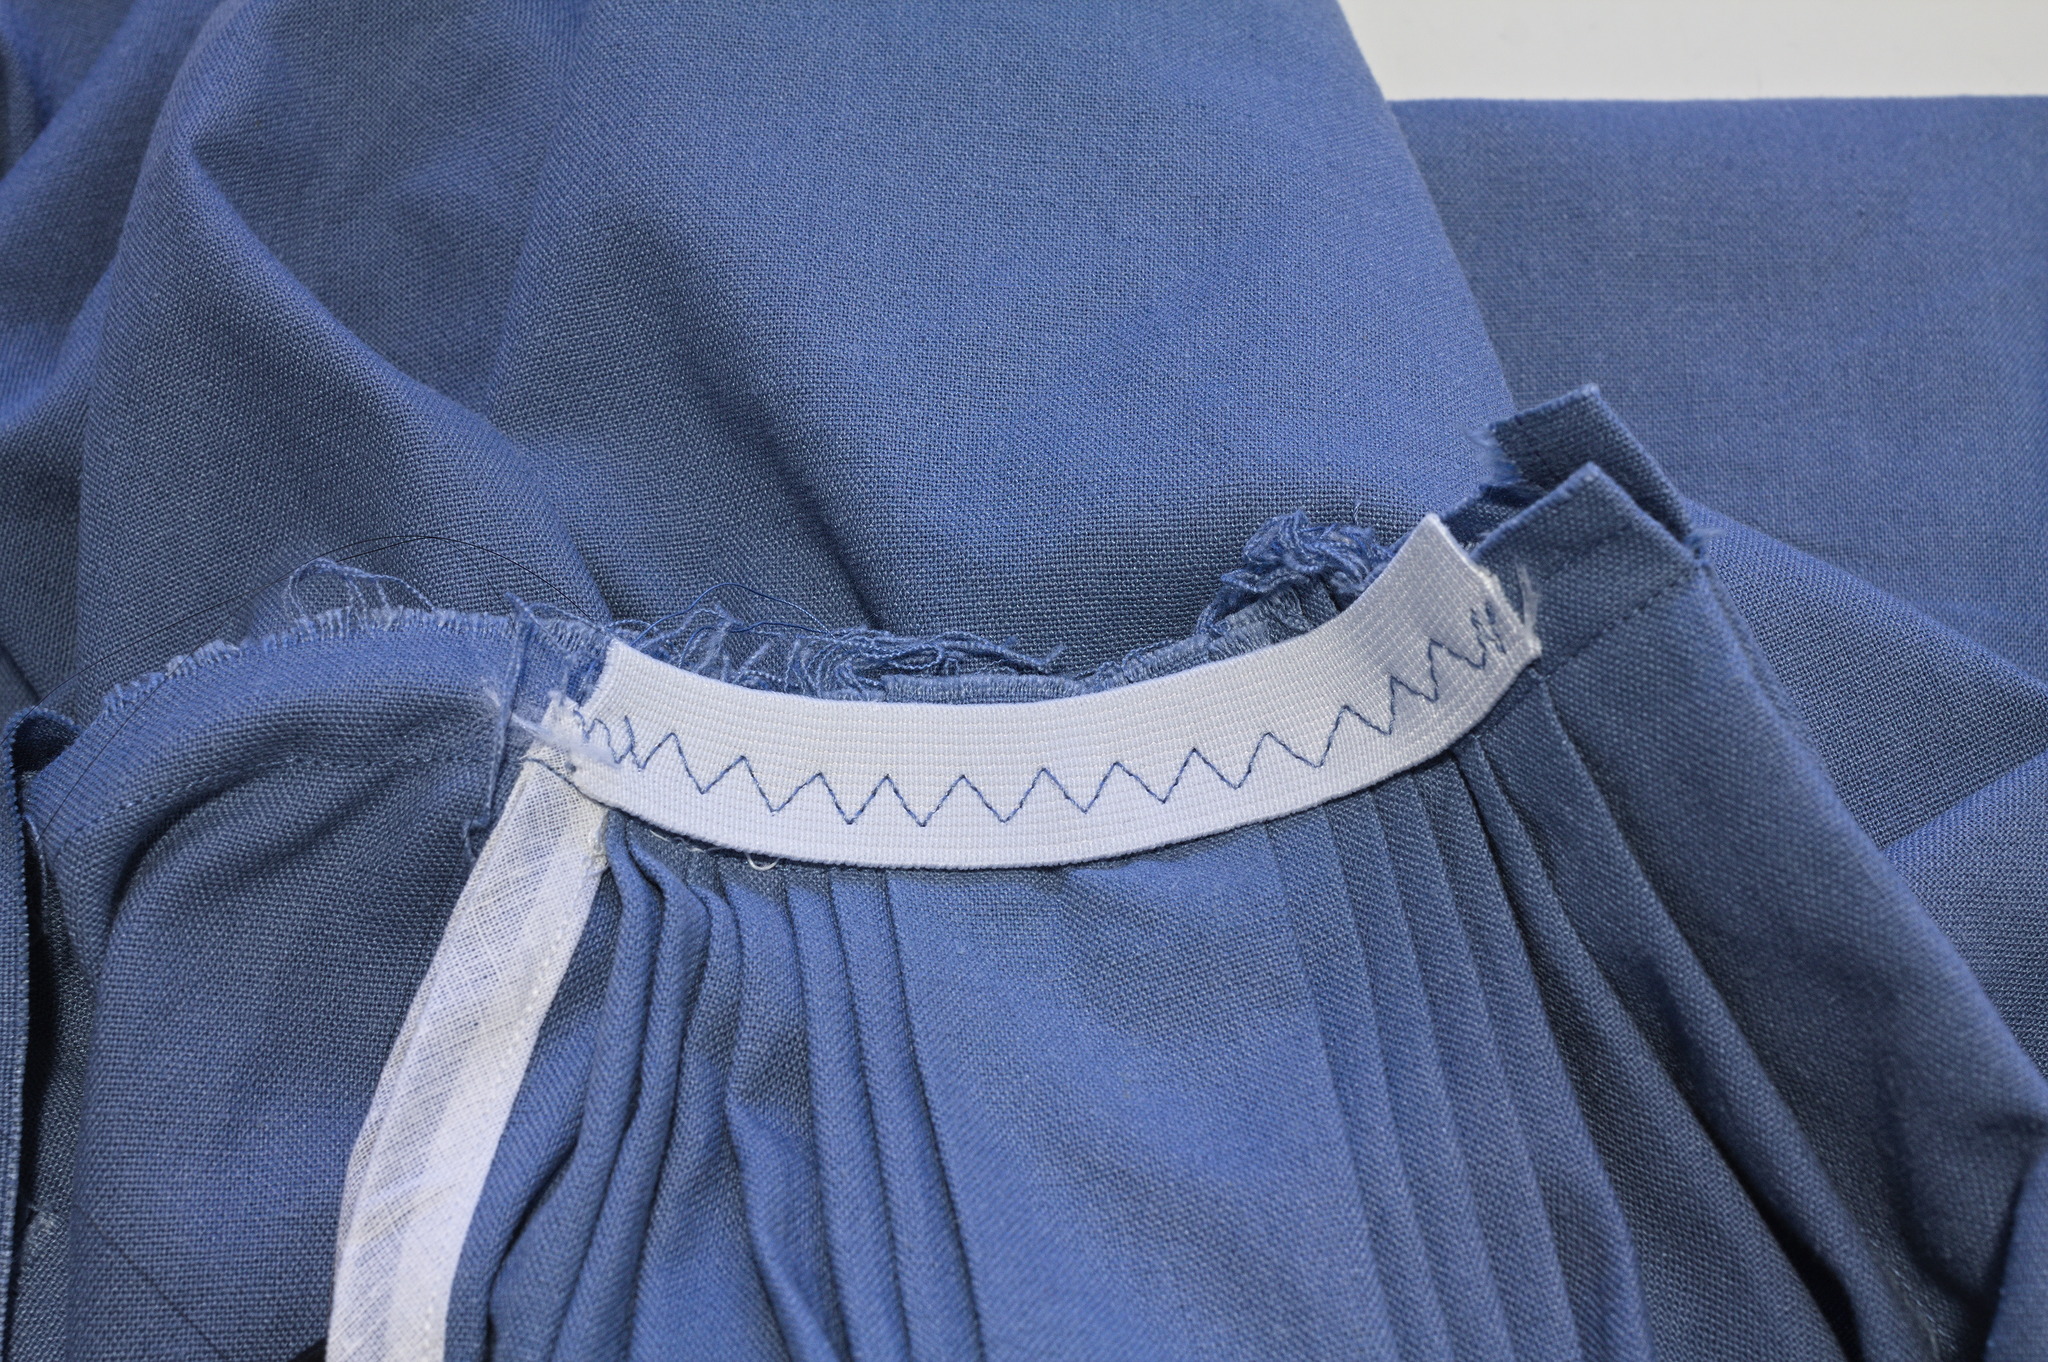 ../../../_images/19a-elastic_in_the_waistband.jpg